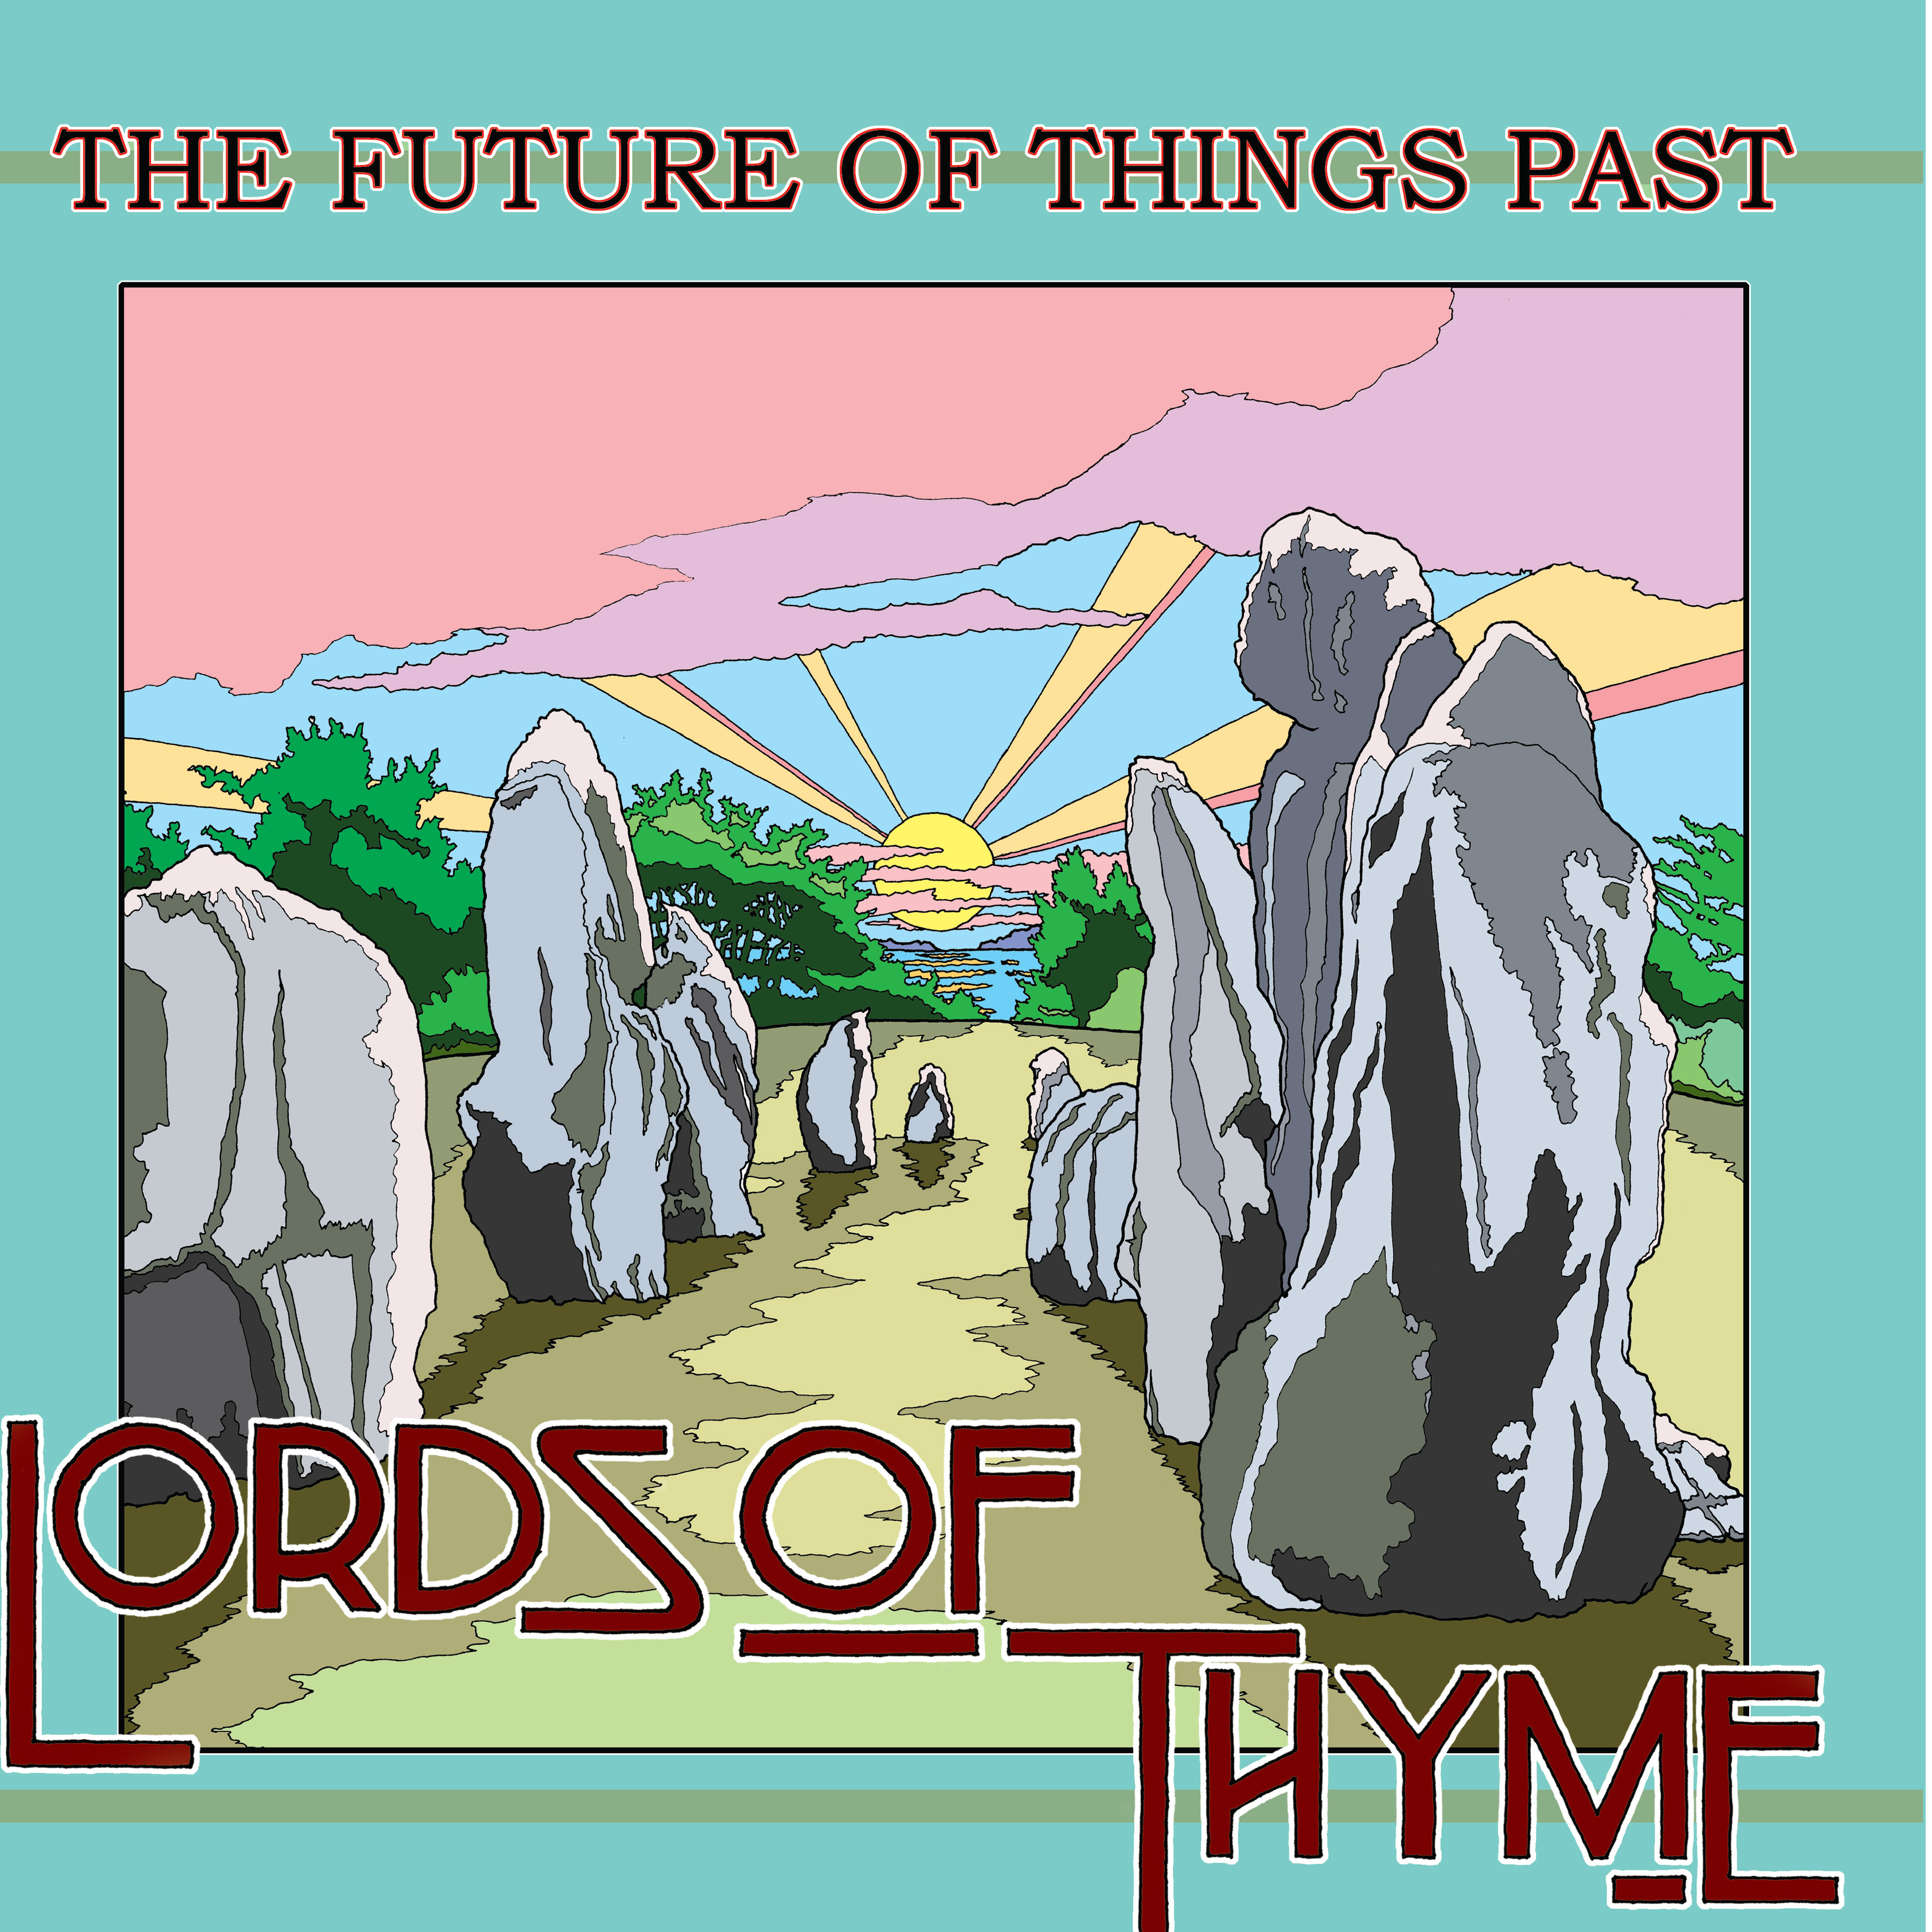 THE FUTURE OF THINGS PAST - LORDS OF THYME